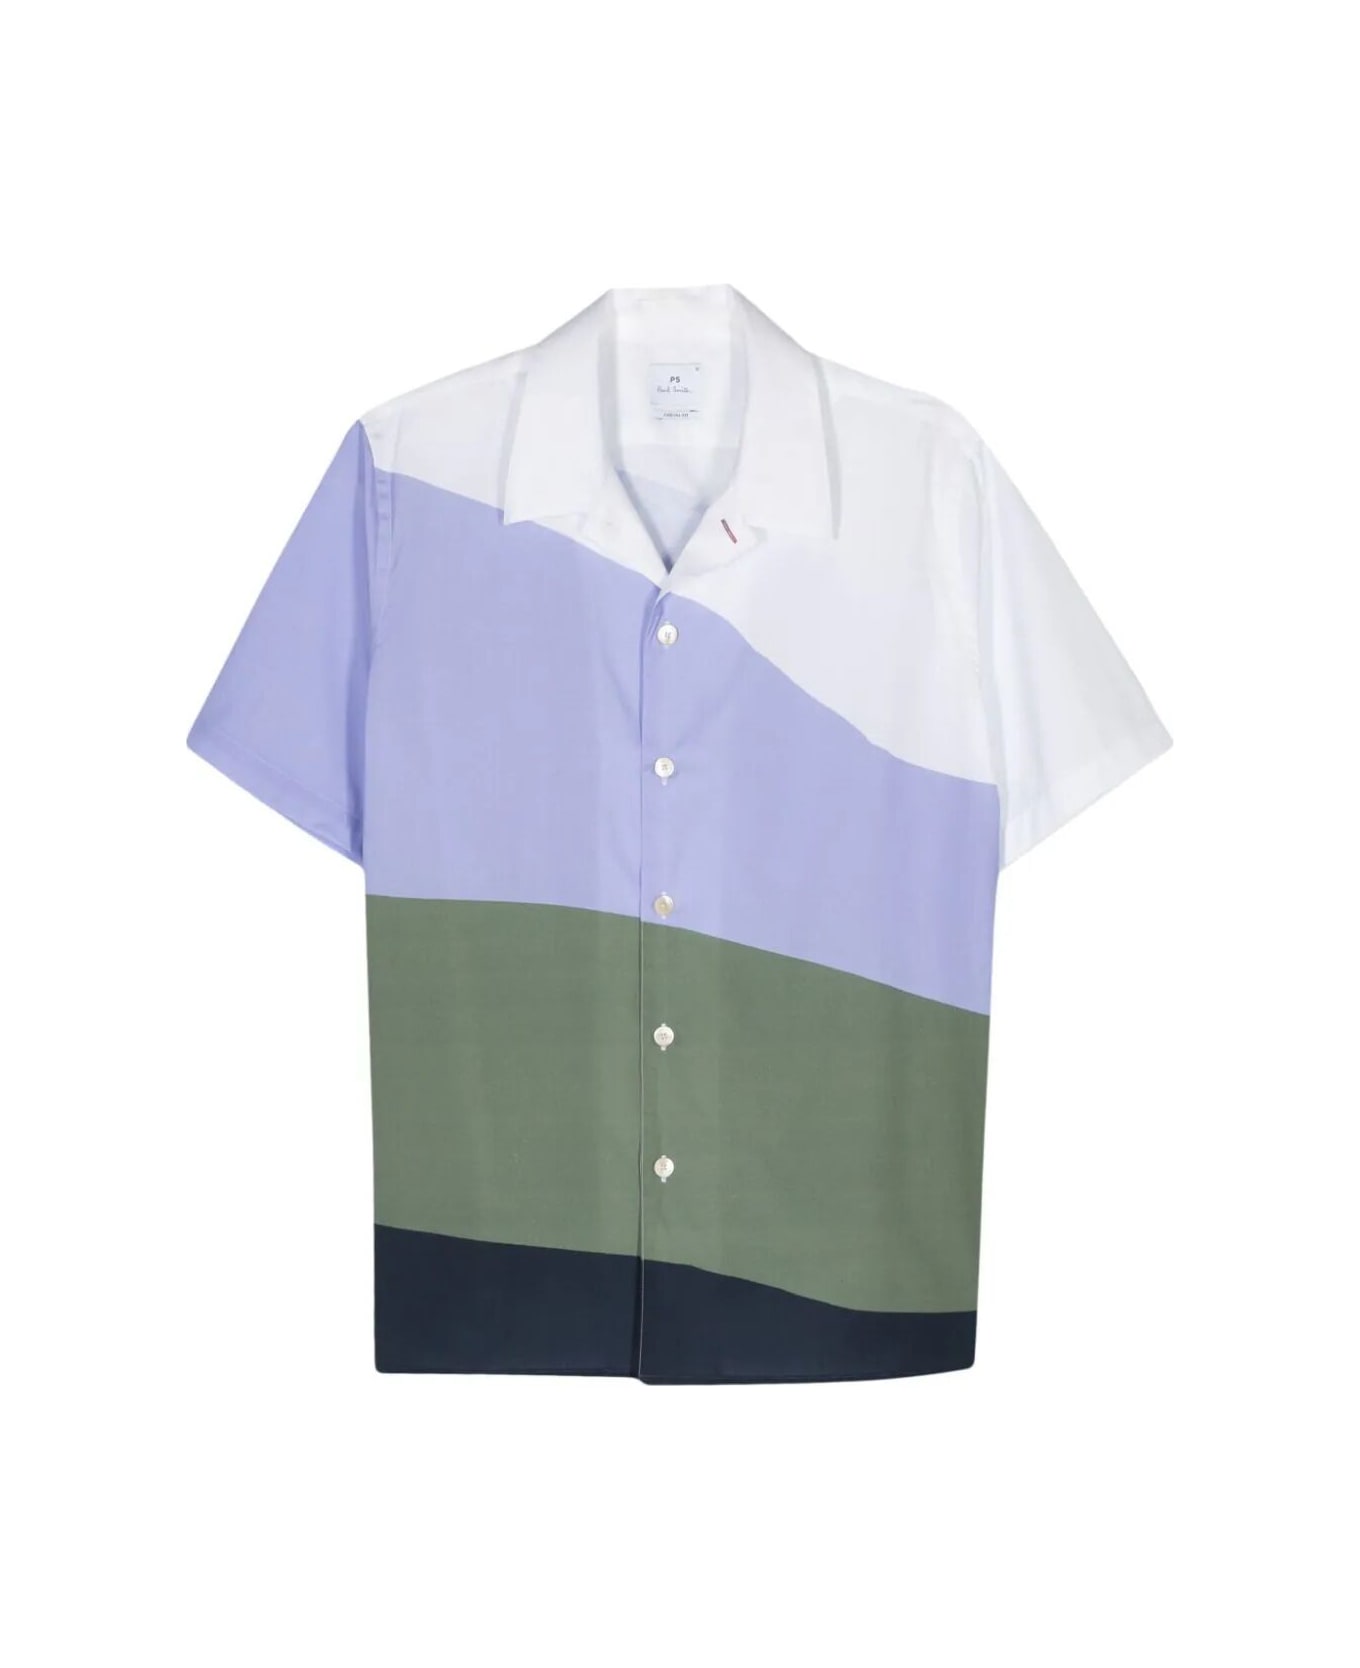 PS by Paul Smith Mens Ss Casual Fit Shirt - Purples シャツ